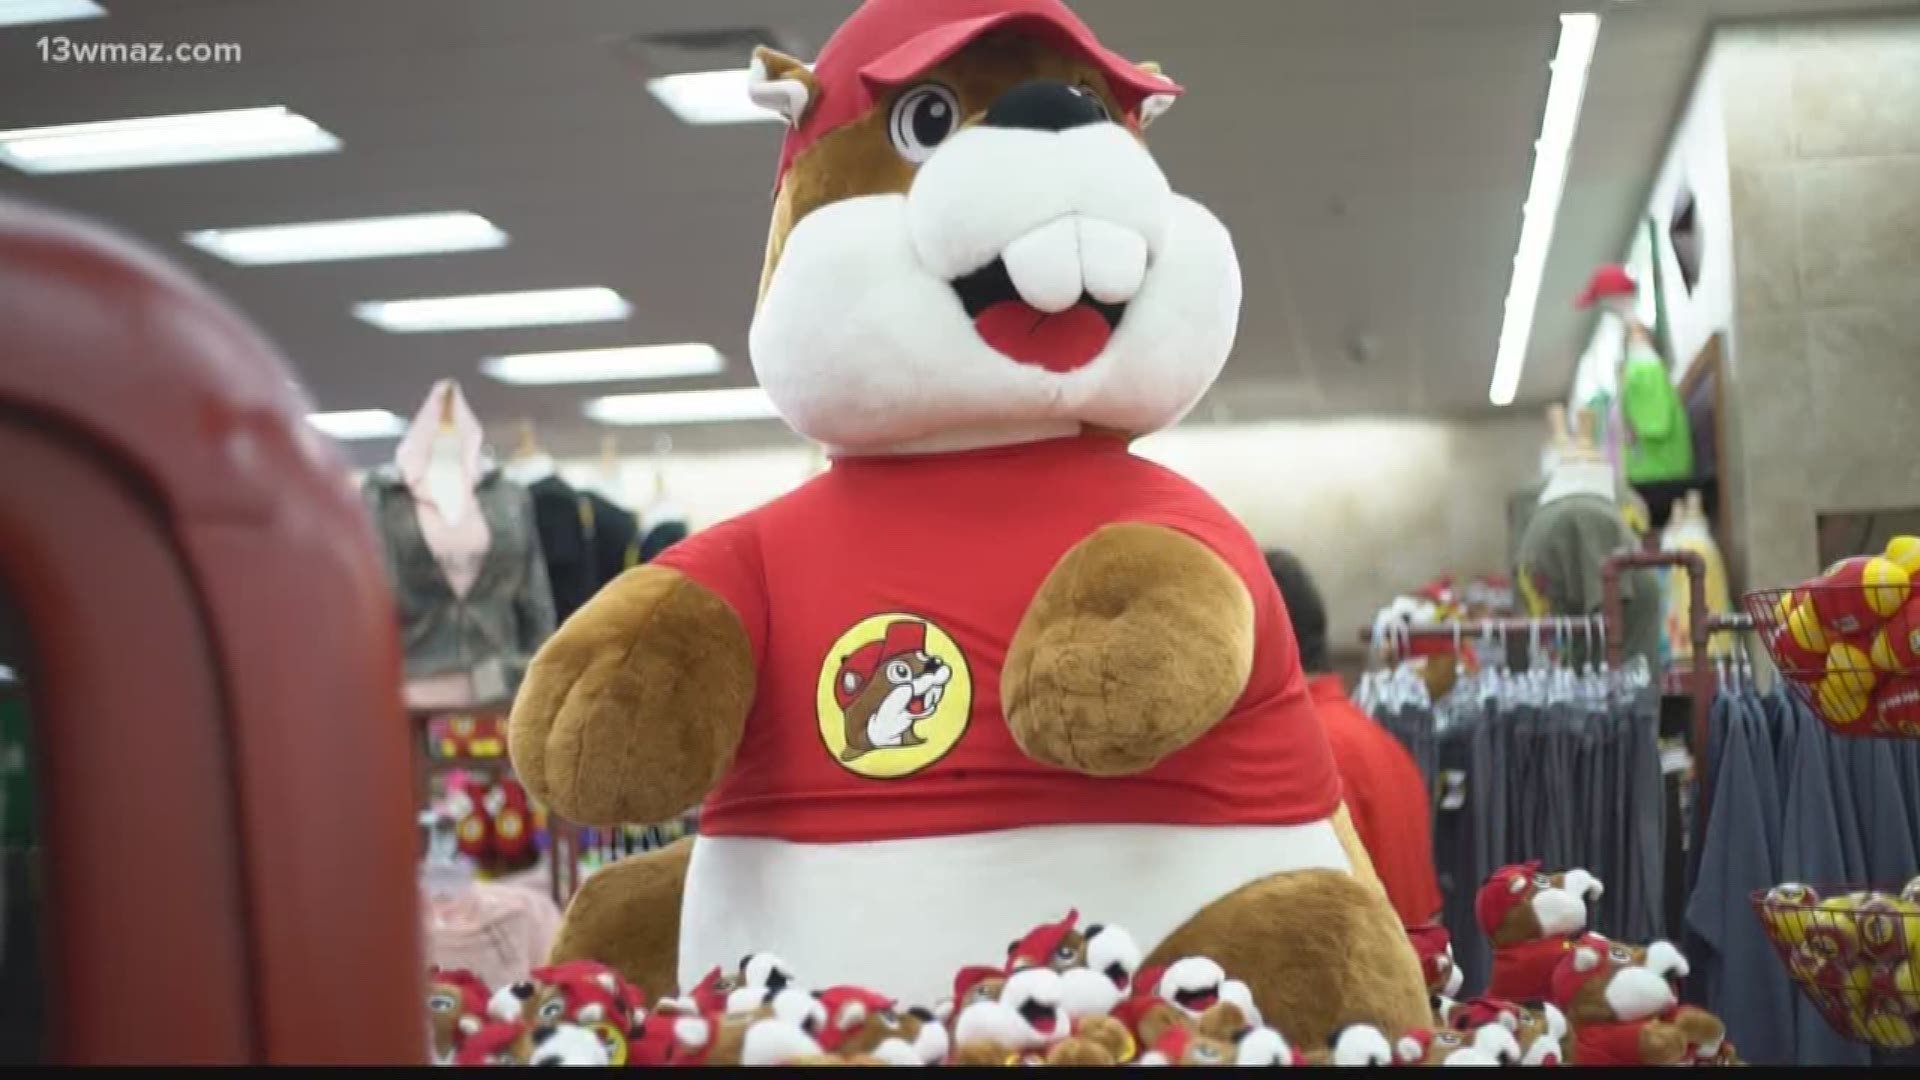 Buc-ee's convenience store is coming to Warner Robins. It's a massive space where you can buy everything from road maps to ribeyes.